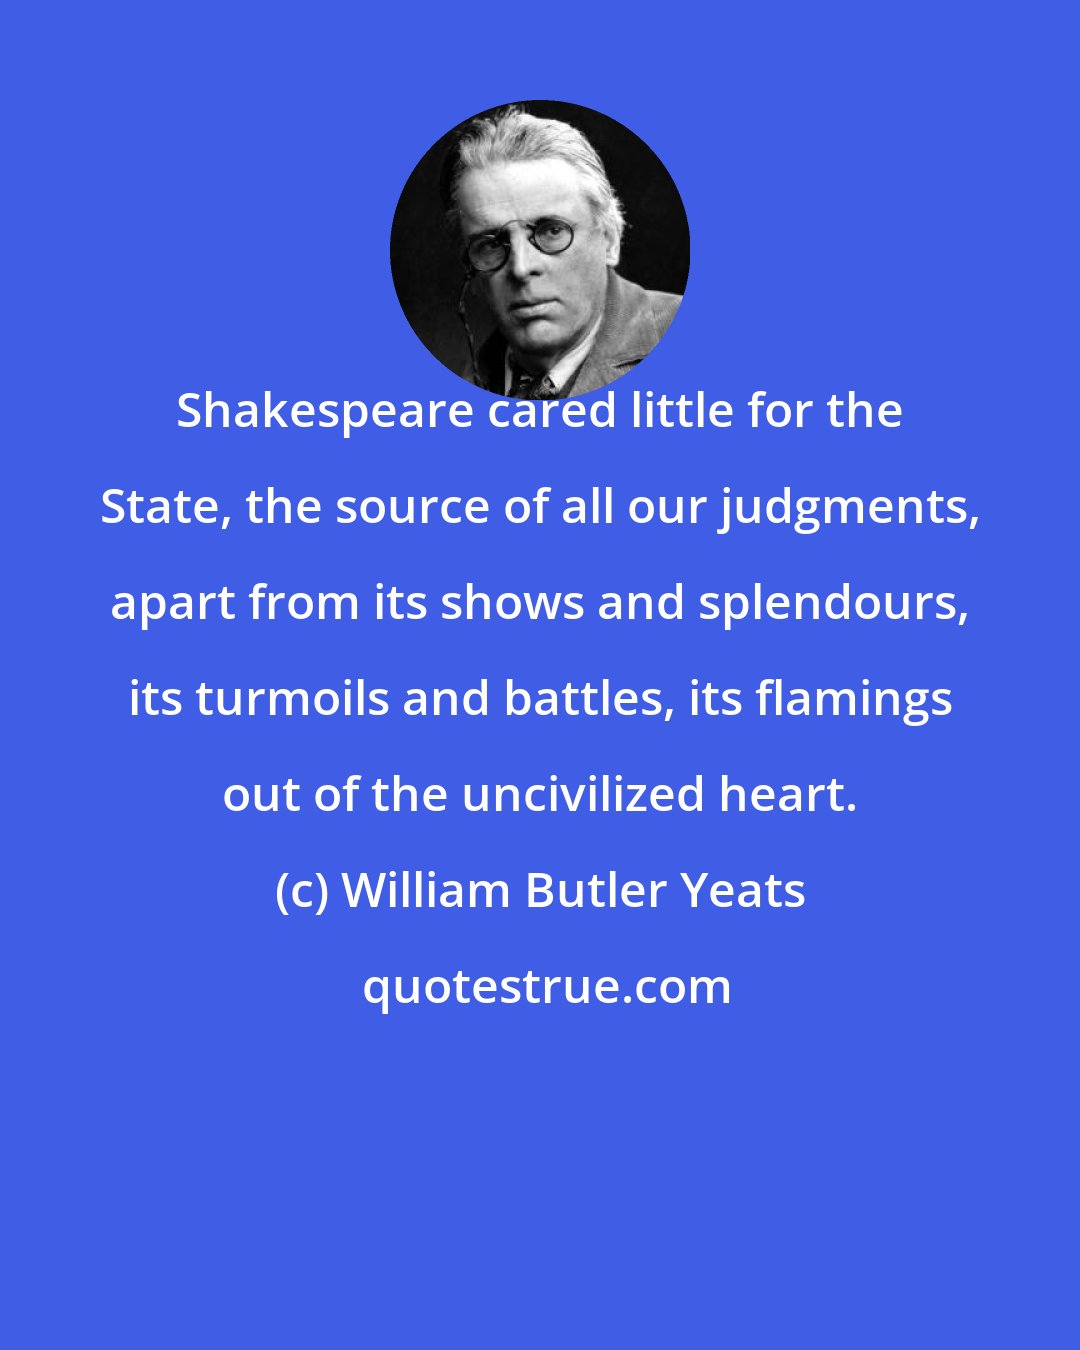 William Butler Yeats: Shakespeare cared little for the State, the source of all our judgments, apart from its shows and splendours, its turmoils and battles, its flamings out of the uncivilized heart.